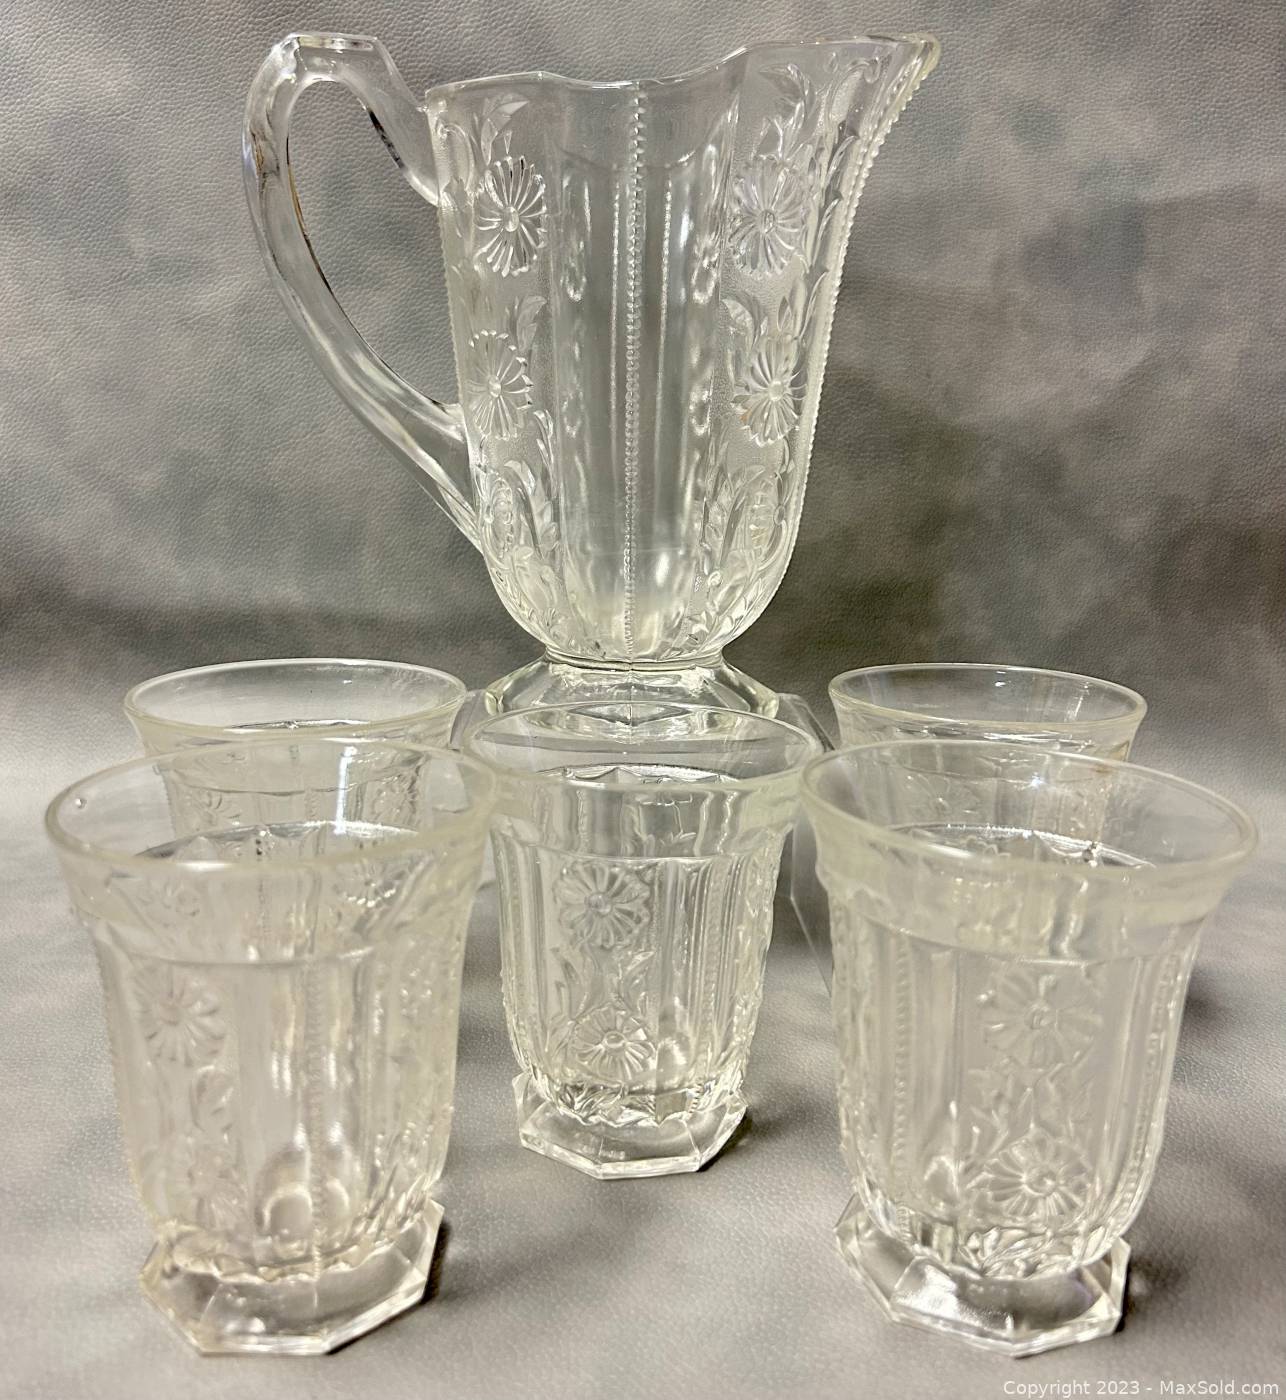 Sold at Auction: Glass Juice Pitcher With 5 Glasses